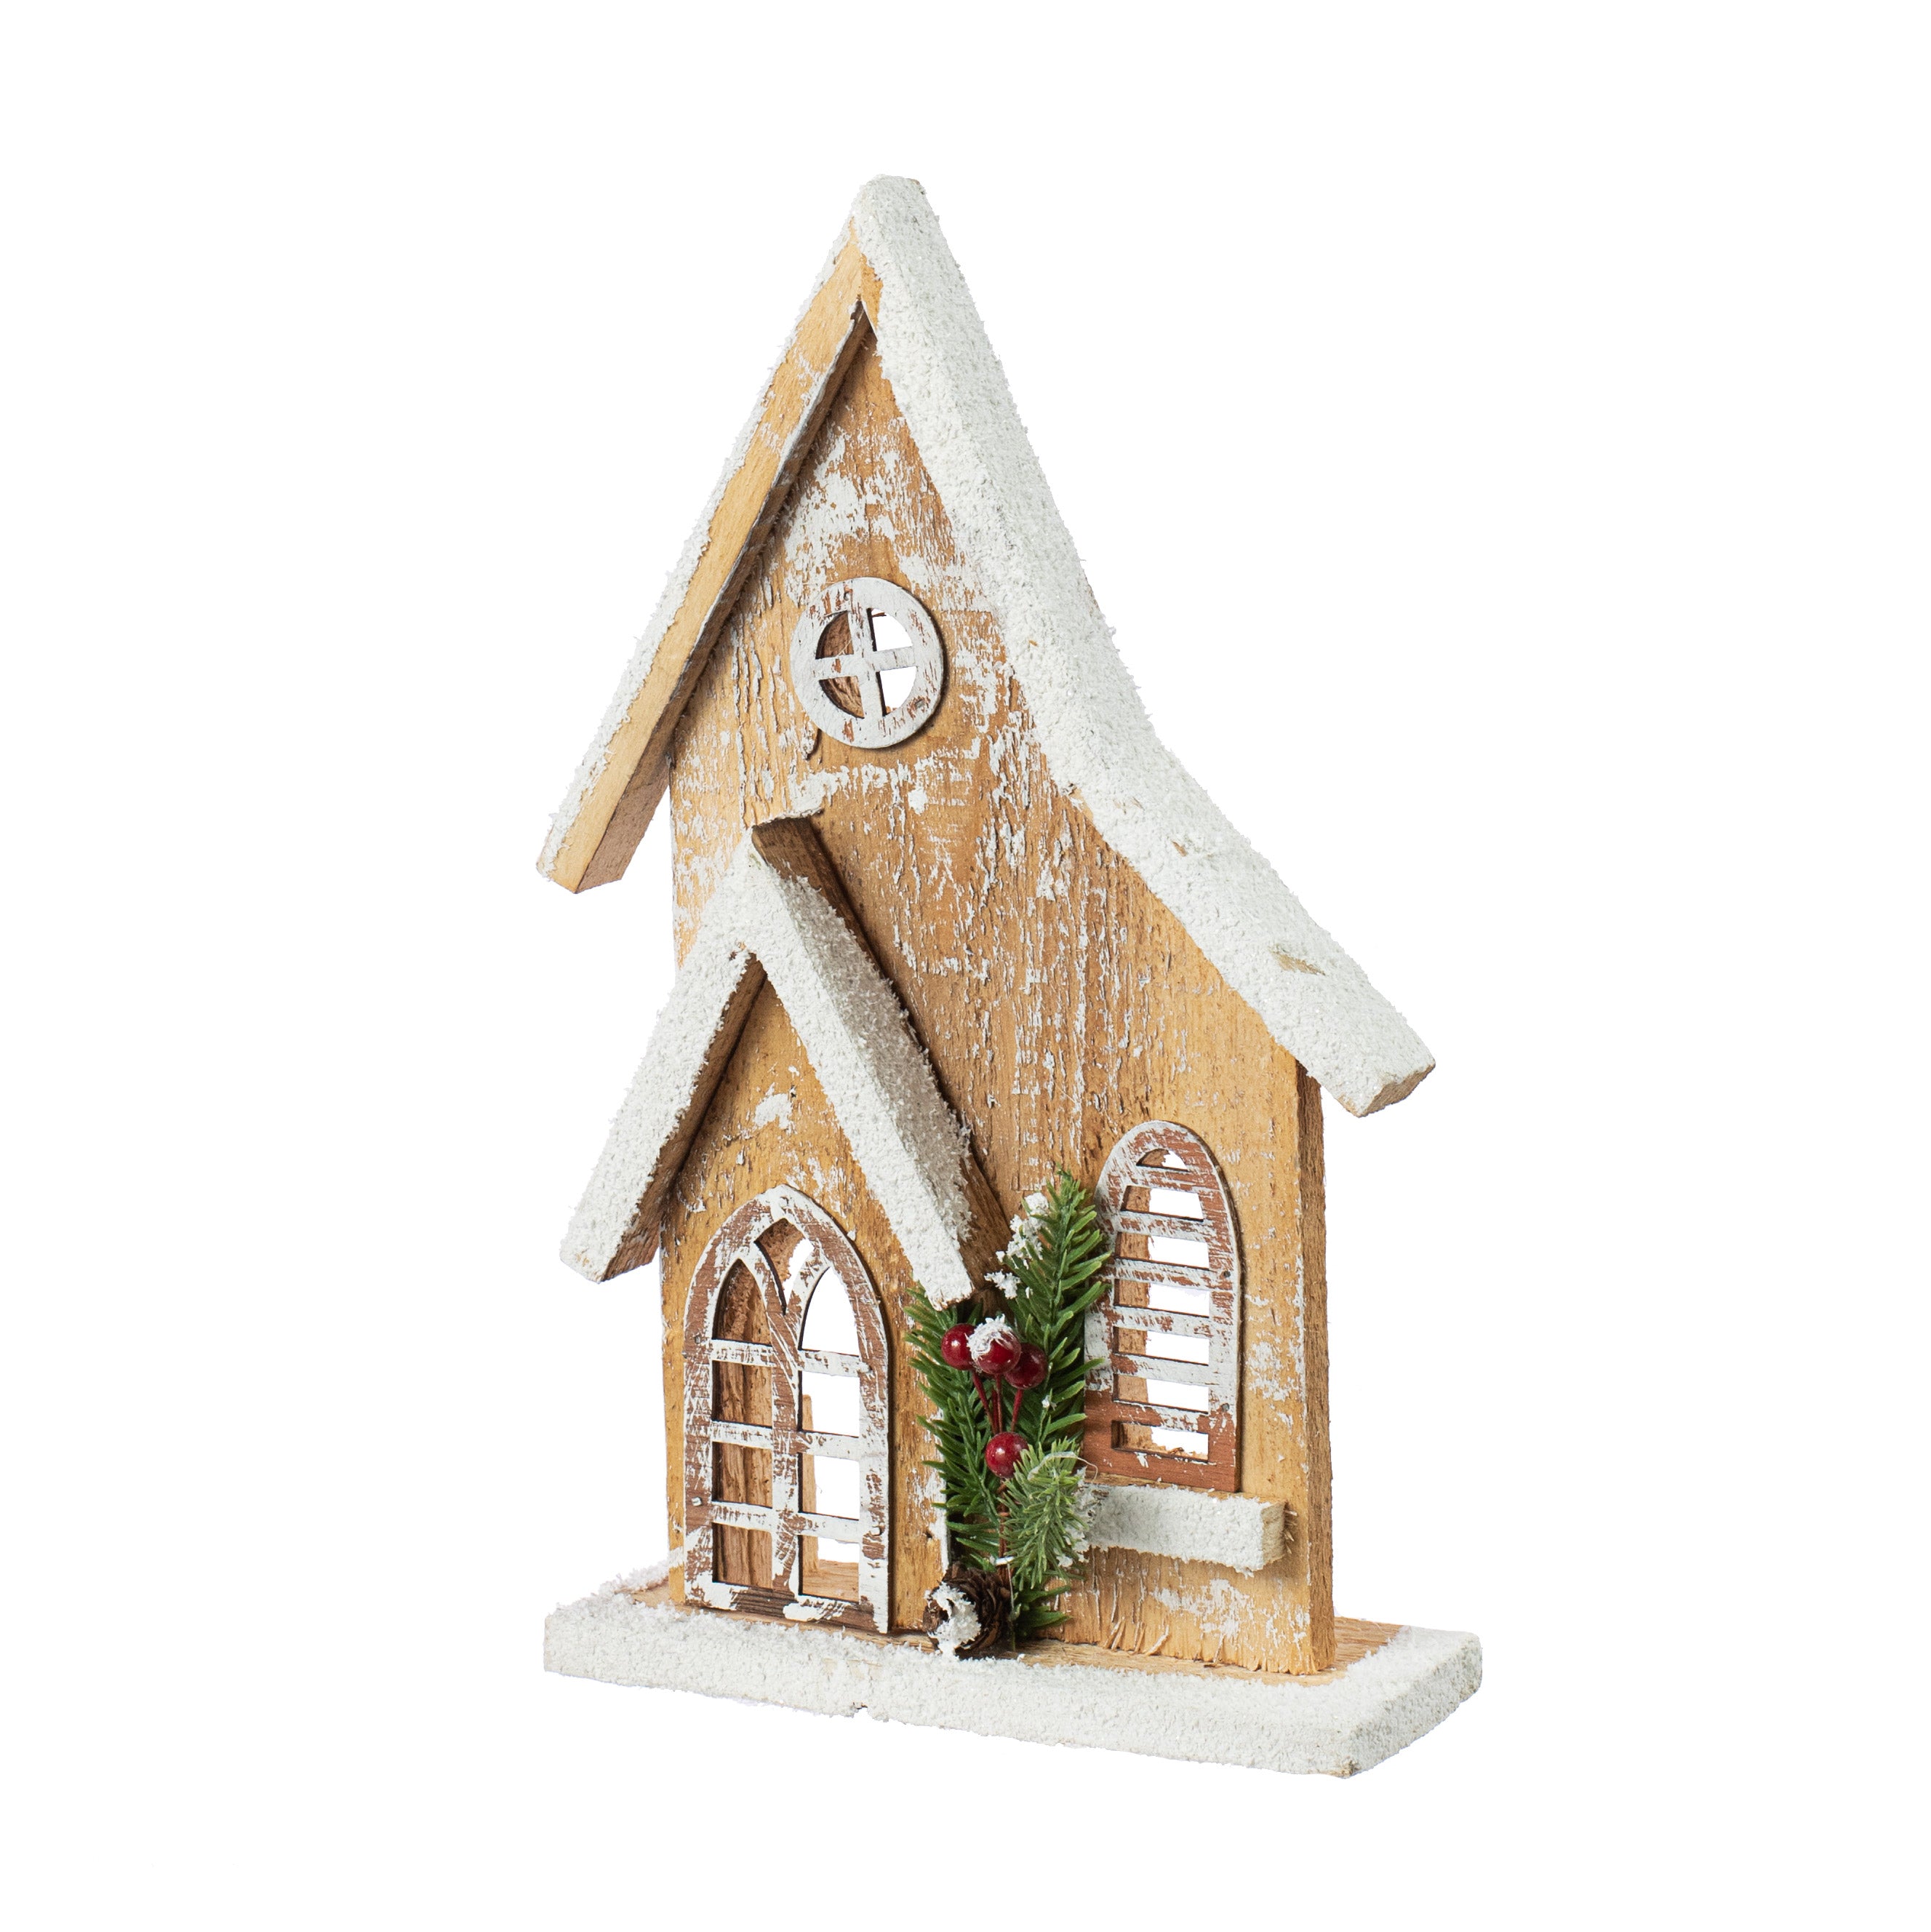 11" Wooden Winter House Decoration: Natural